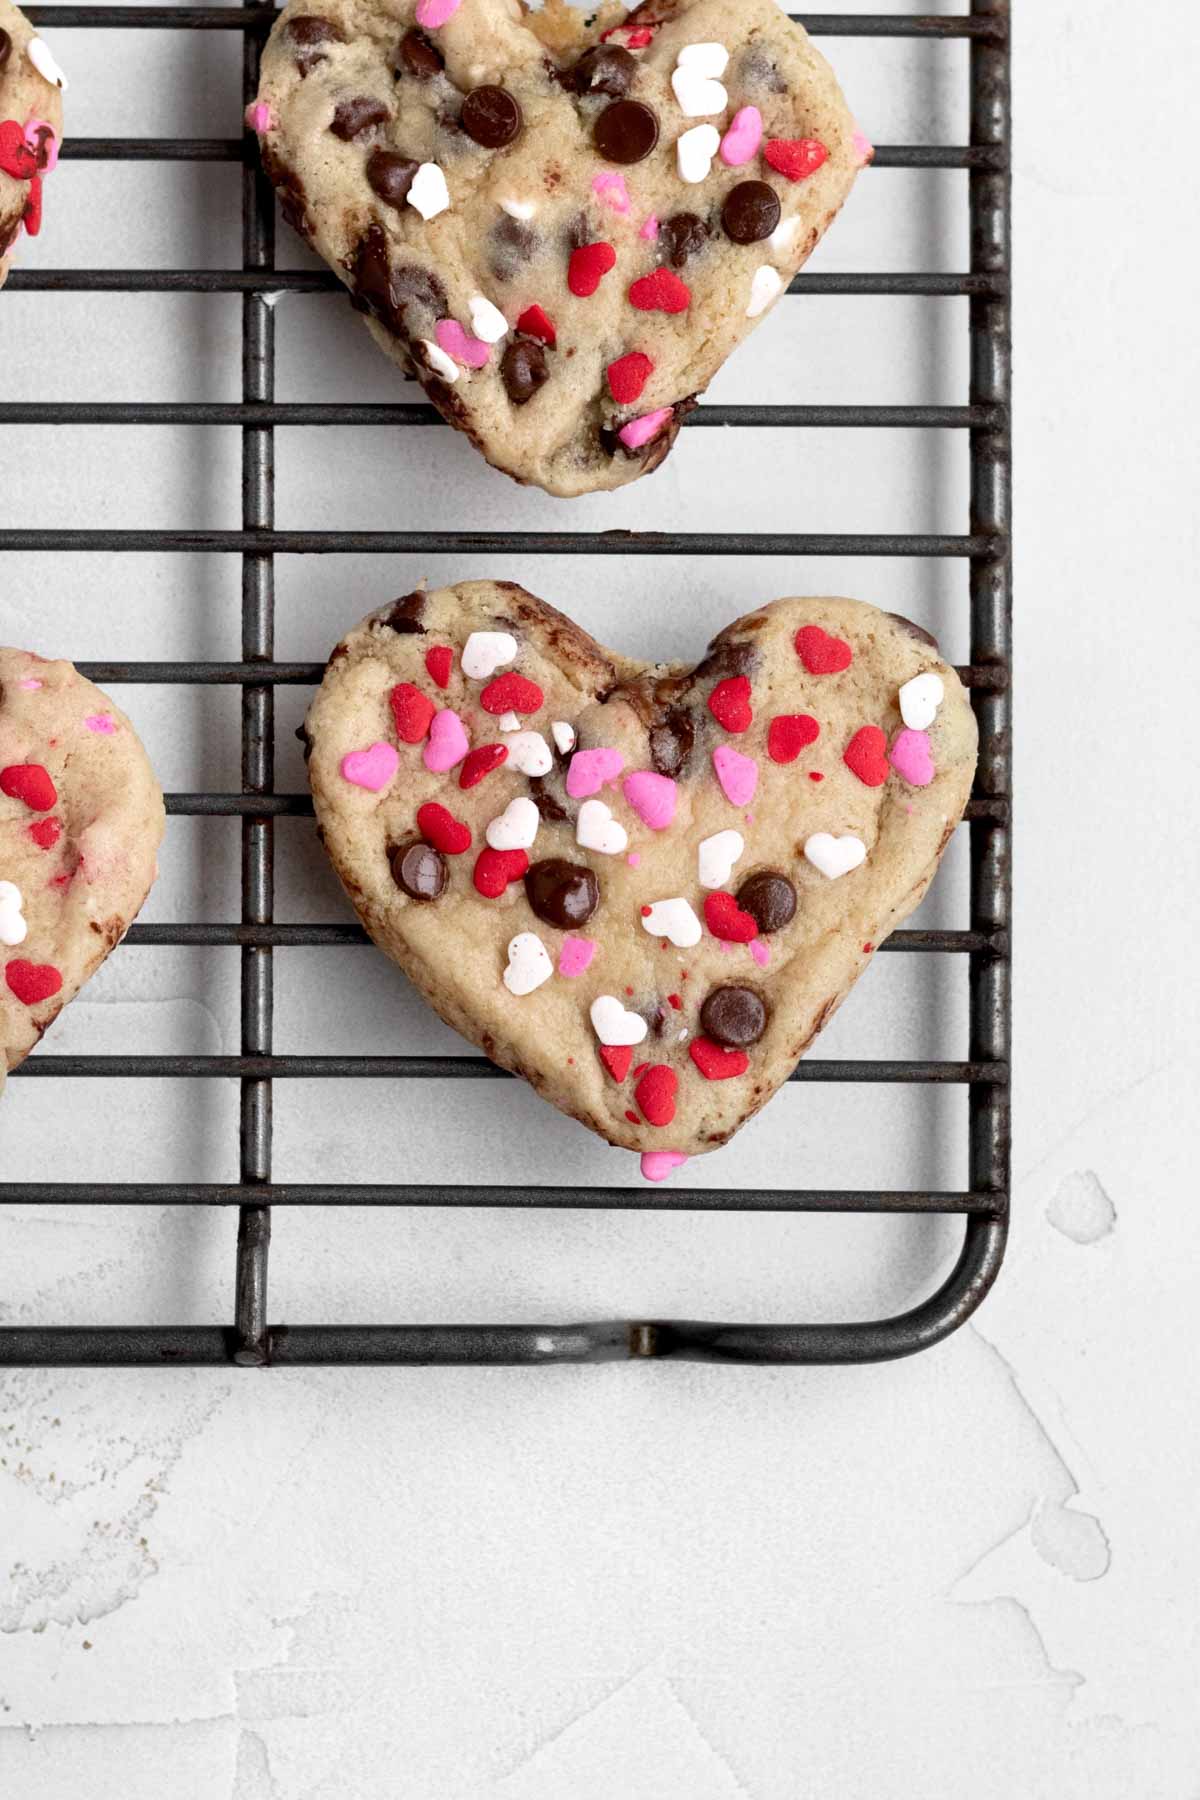 Warm and delicious Heart Shaped Chocolate Chip Cookies resting on a cooling rack.